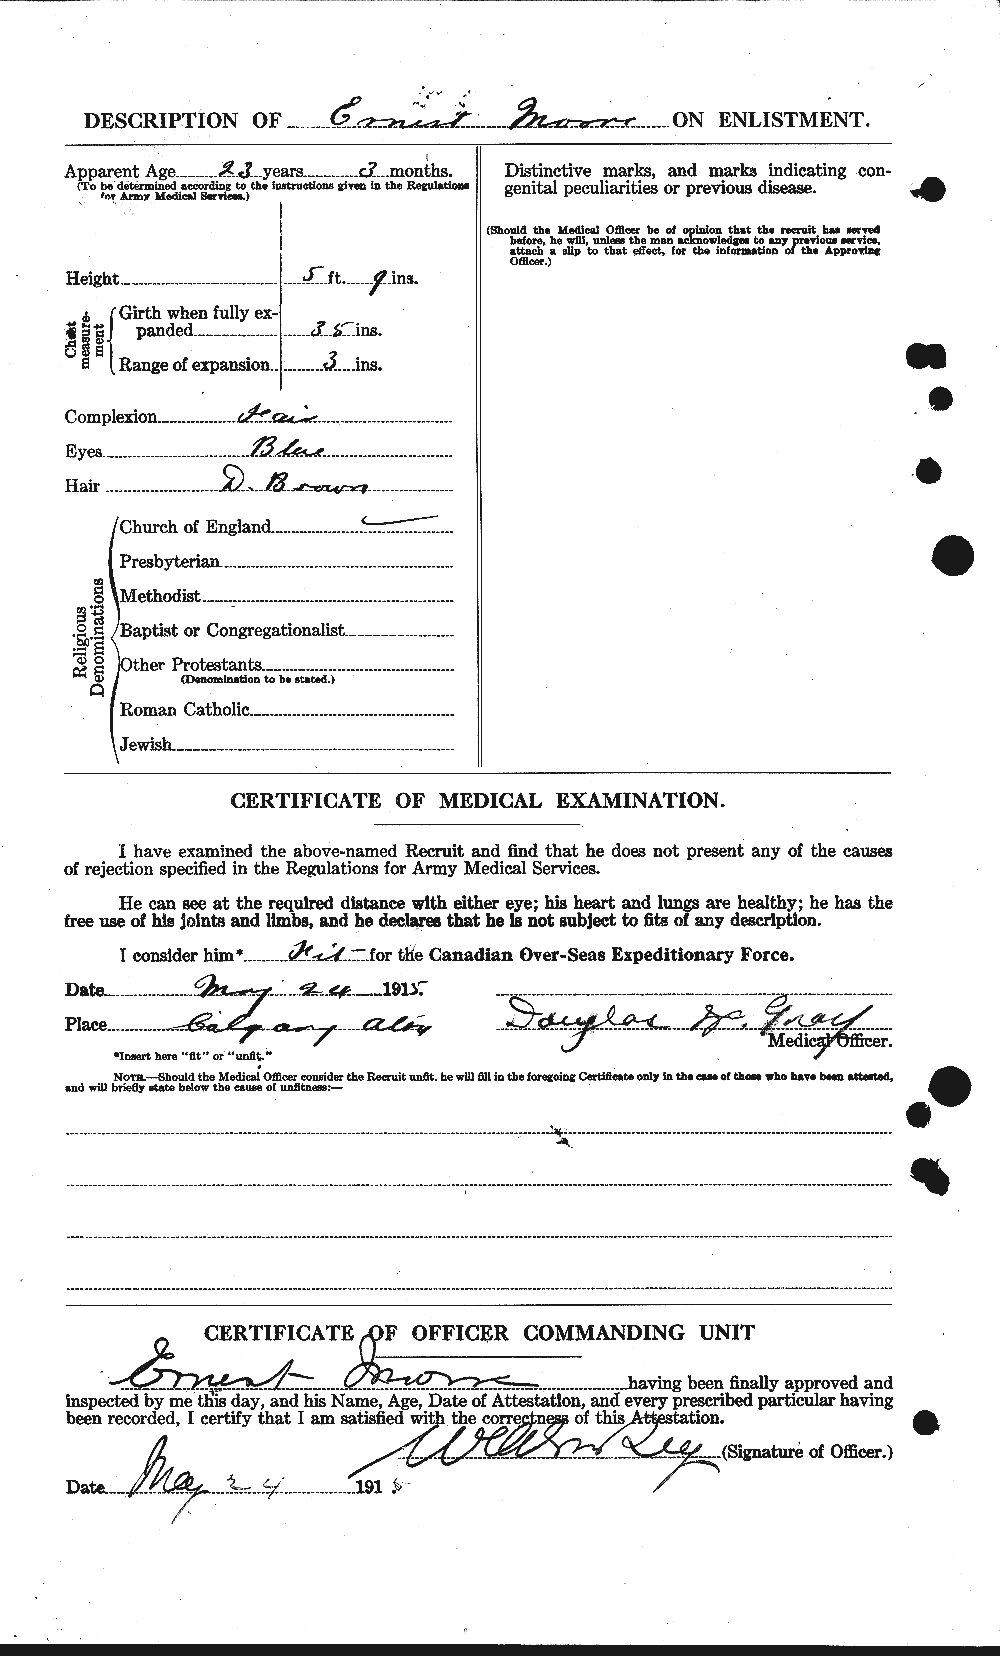 Personnel Records of the First World War - CEF 506656b